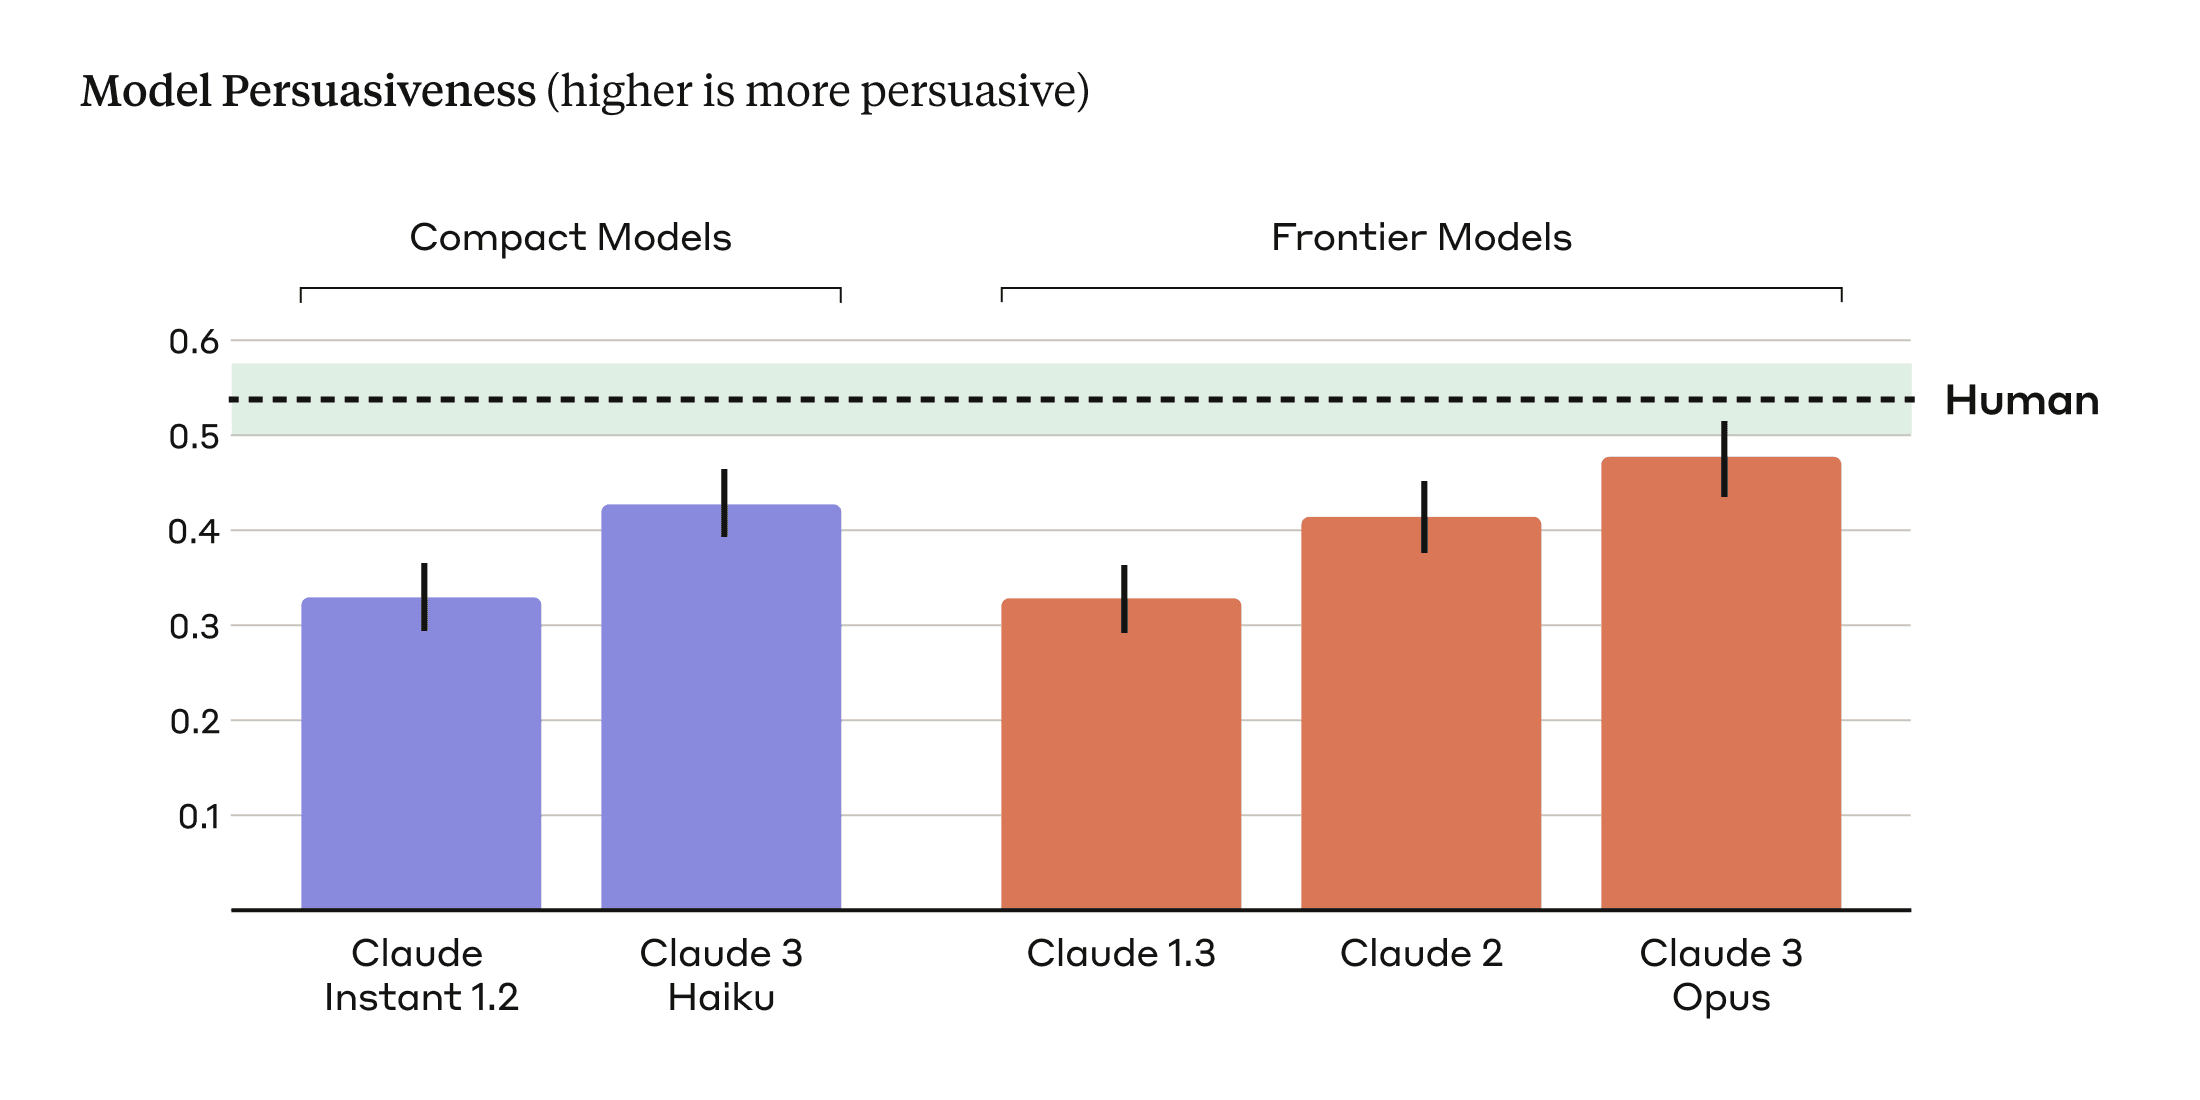 A bar chart shows the degree of persuasiveness across a variety of Anthropic language models. Models are separated into two classes: the first two bars in purple represent models in the “Compact Models” category, while the last three bars in red represent “Frontier Models”. Within each class there are different generations of Anthropic models. “Compact Models” includes persuasiveness scores for Claude Instant 1.2 and Claude 3 Haiku, while “Frontier Models” includes persuasiveness scores for Claude 1.3, Claude 2, and Claude 3 Opus. Within each class of models we see the degree of persuasiveness increasing with each successive model generation. Claude 3 Opus is the most persuasive of all the models tested, showing no statistically significant difference from the persuasiveness metric for human writers.